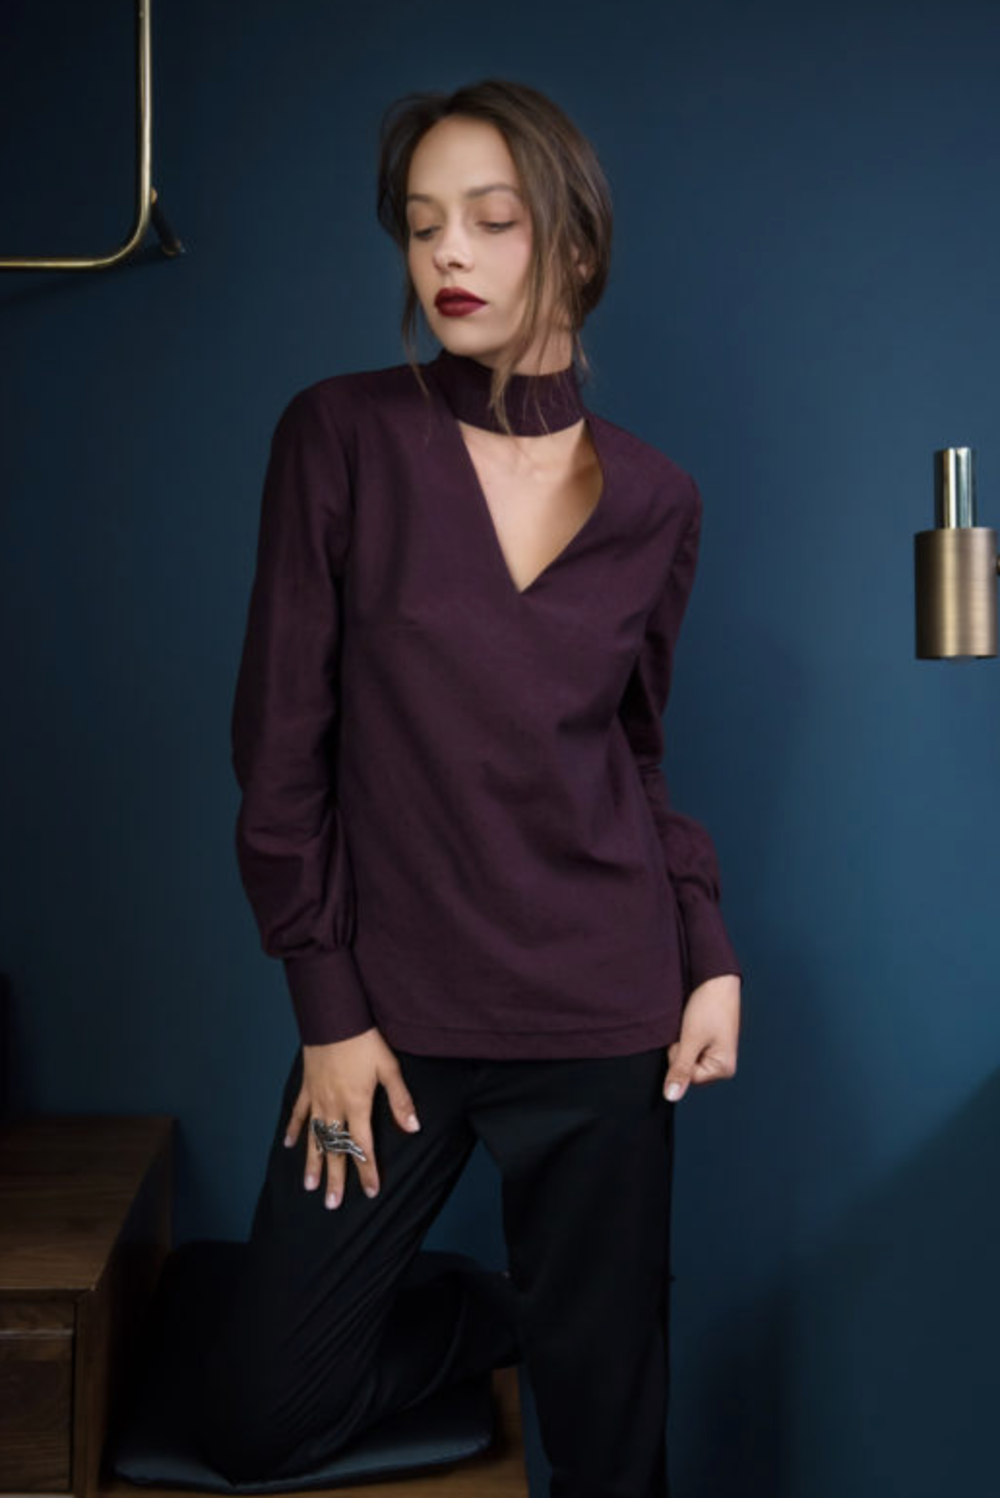 Woman wearing the Prague Blouse sewing pattern from Orageuse on The Fold Line. A blouse pattern made in viscose, cotton, silk or Tencel fabrics, featuring a high collar with back button fastening, cut out V-neck detail and long sleeves with button fasteni